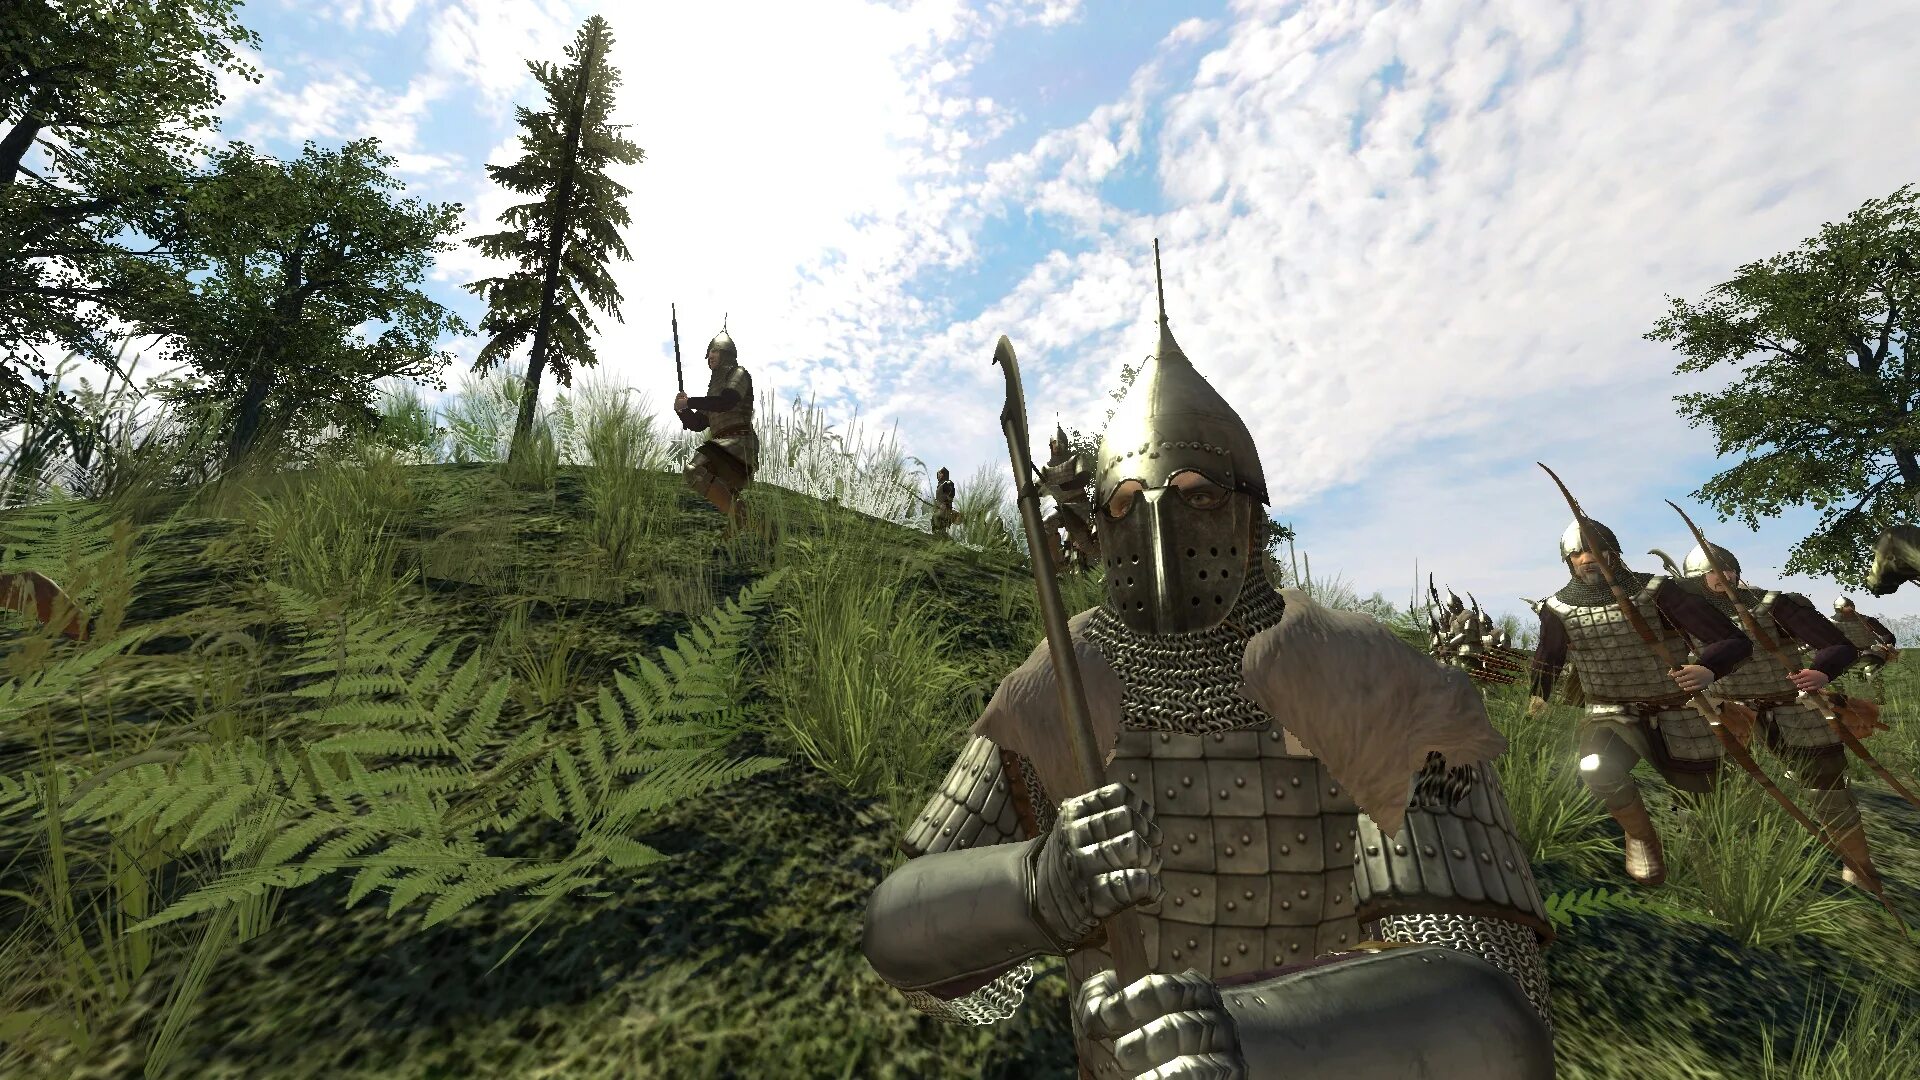 Mount & Blade: Warband. Mount and Blade 2 Русь. Mount and Blade Русь 13. Игра Mount & Blade 3. Steam warband